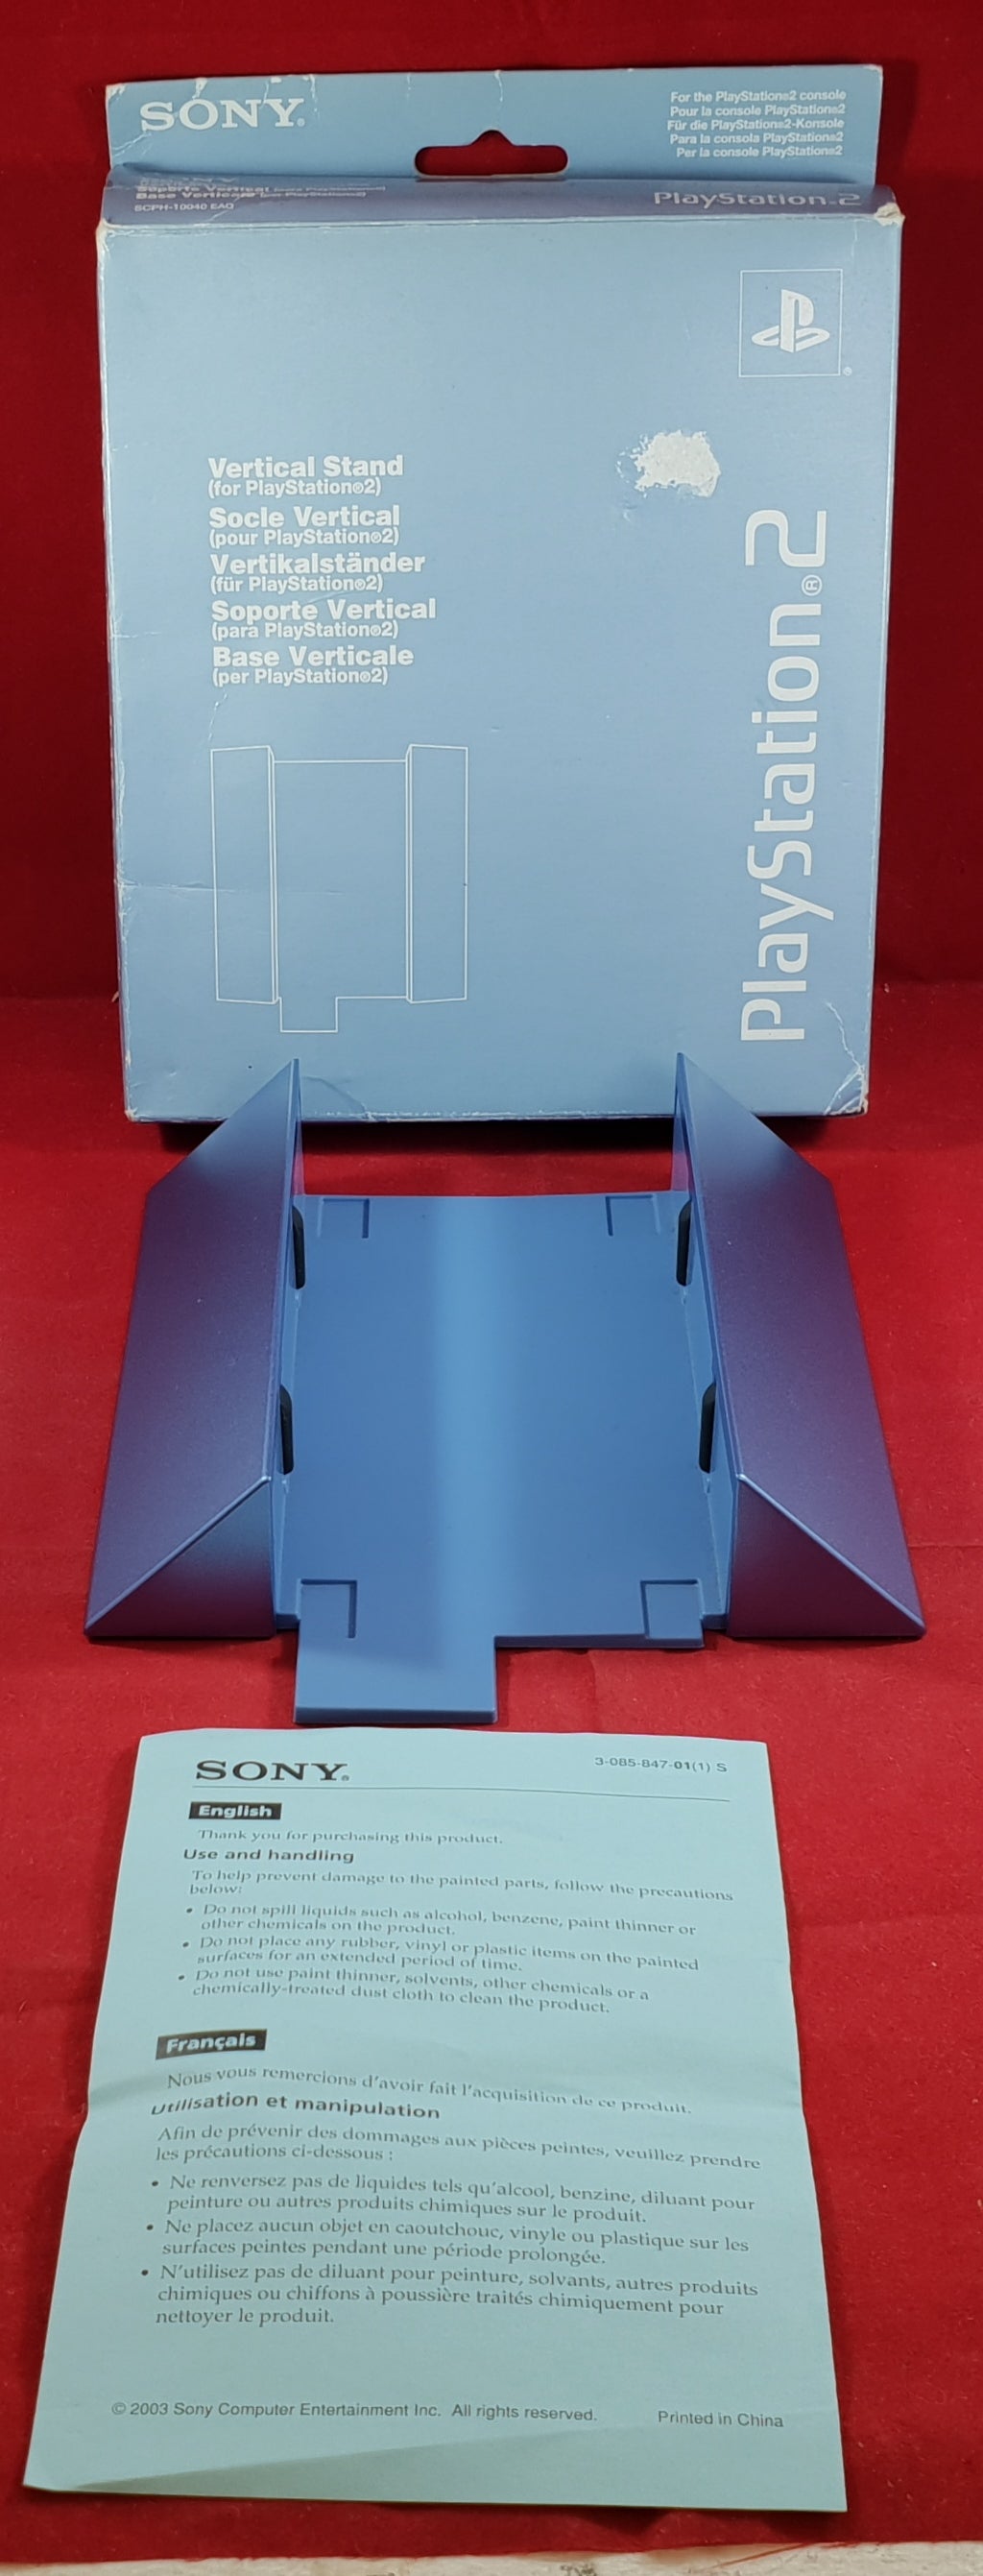 Sony Playstation 2 (PS2) Limited Edition Light Blue Boxed Vertical Stand RARE Accessory